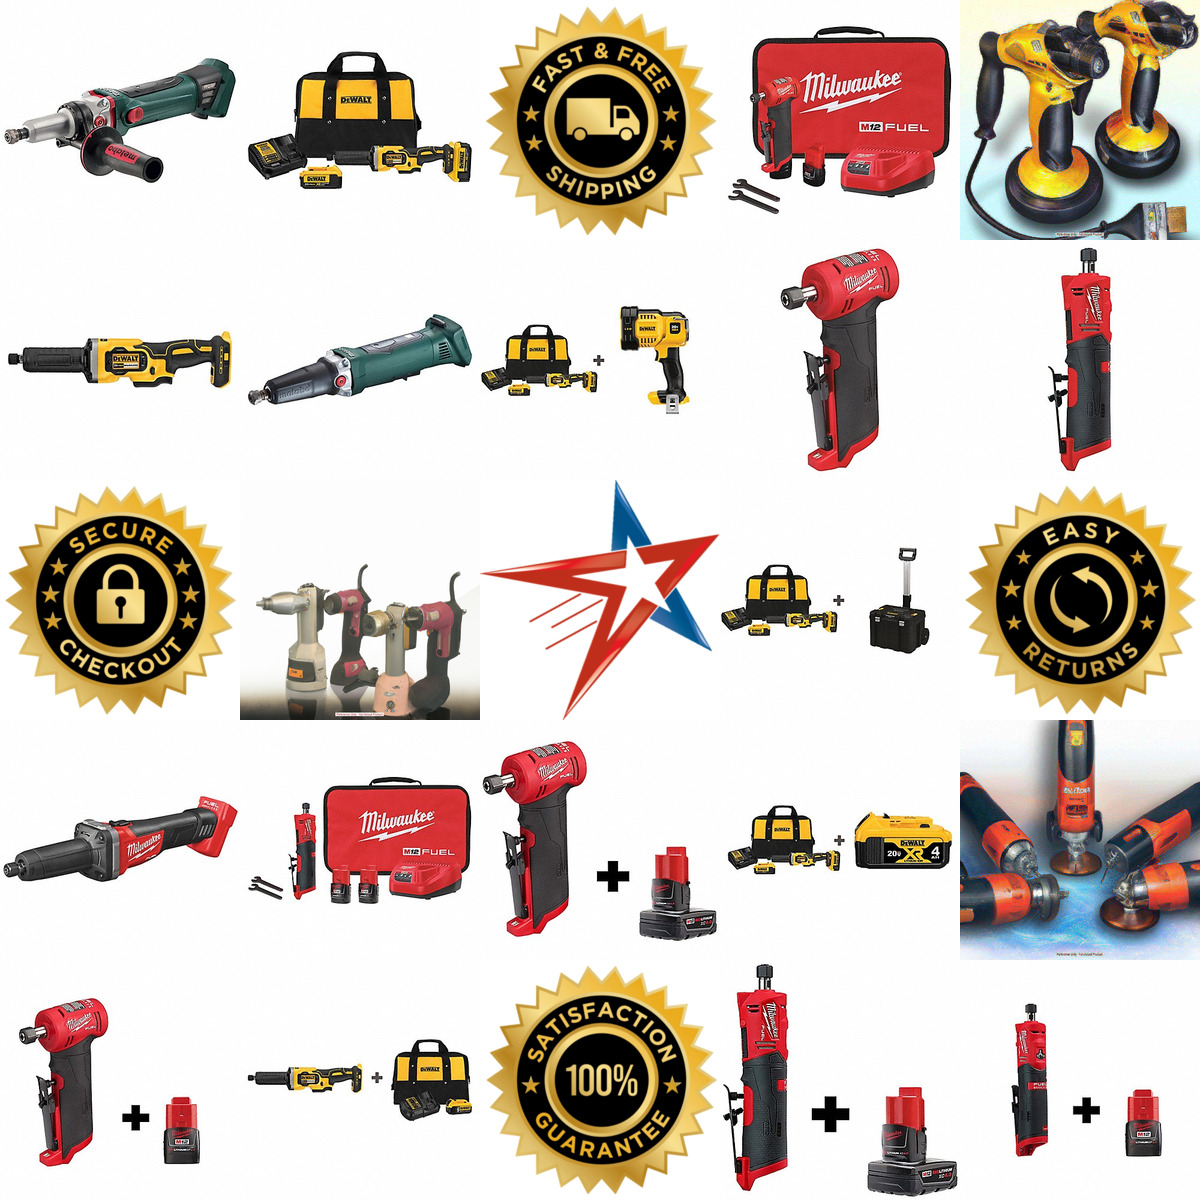 A selection of Cordless Straight and Die Grinders products on GoVets